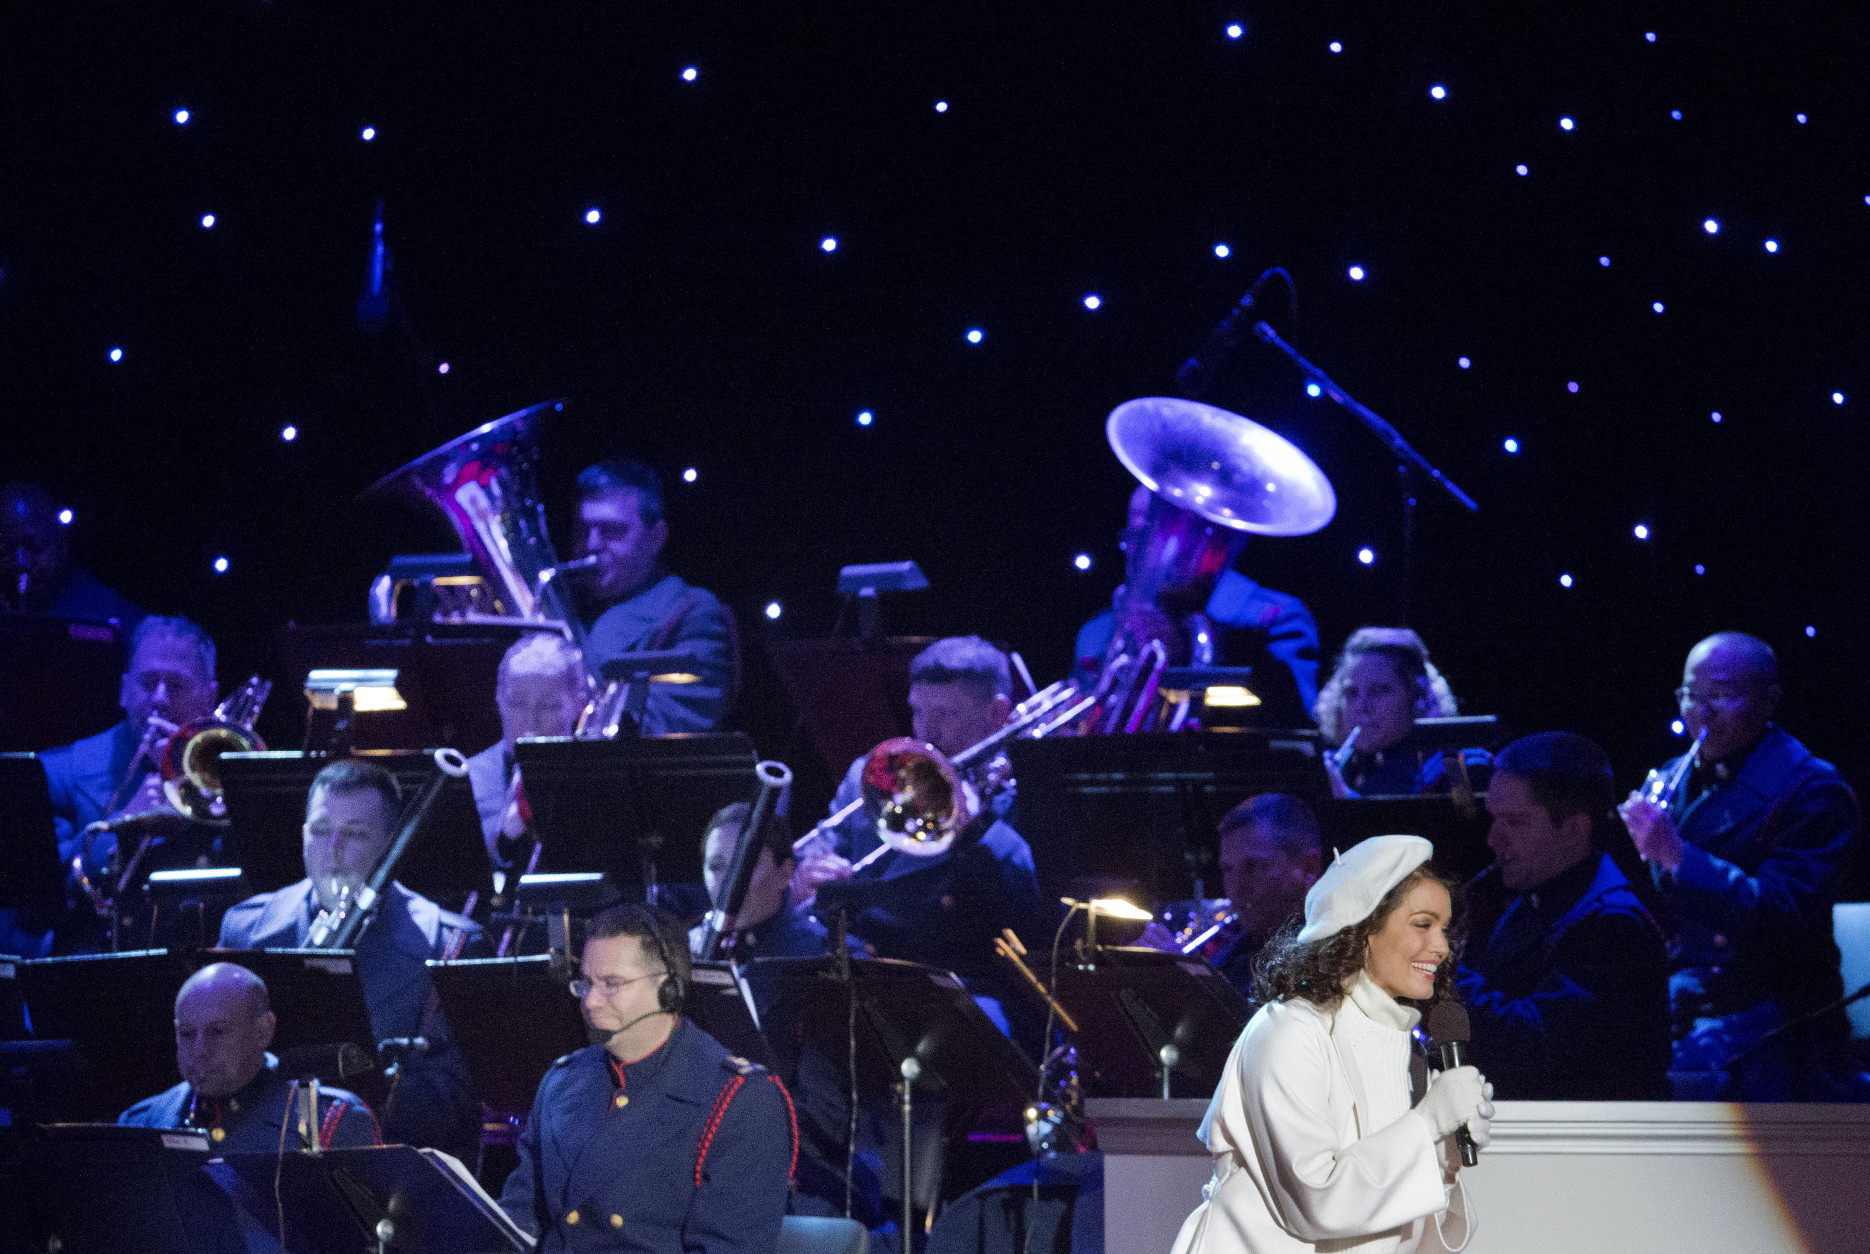 Actress Bellamy Young performs on stage with the United States Coast Guard Band during the National Christmas Tree Lighting ceremony at the Ellipse in Washington, Thursday, Dec. 3, 2015. (AP Photo/Pablo Martinez Monsivais)